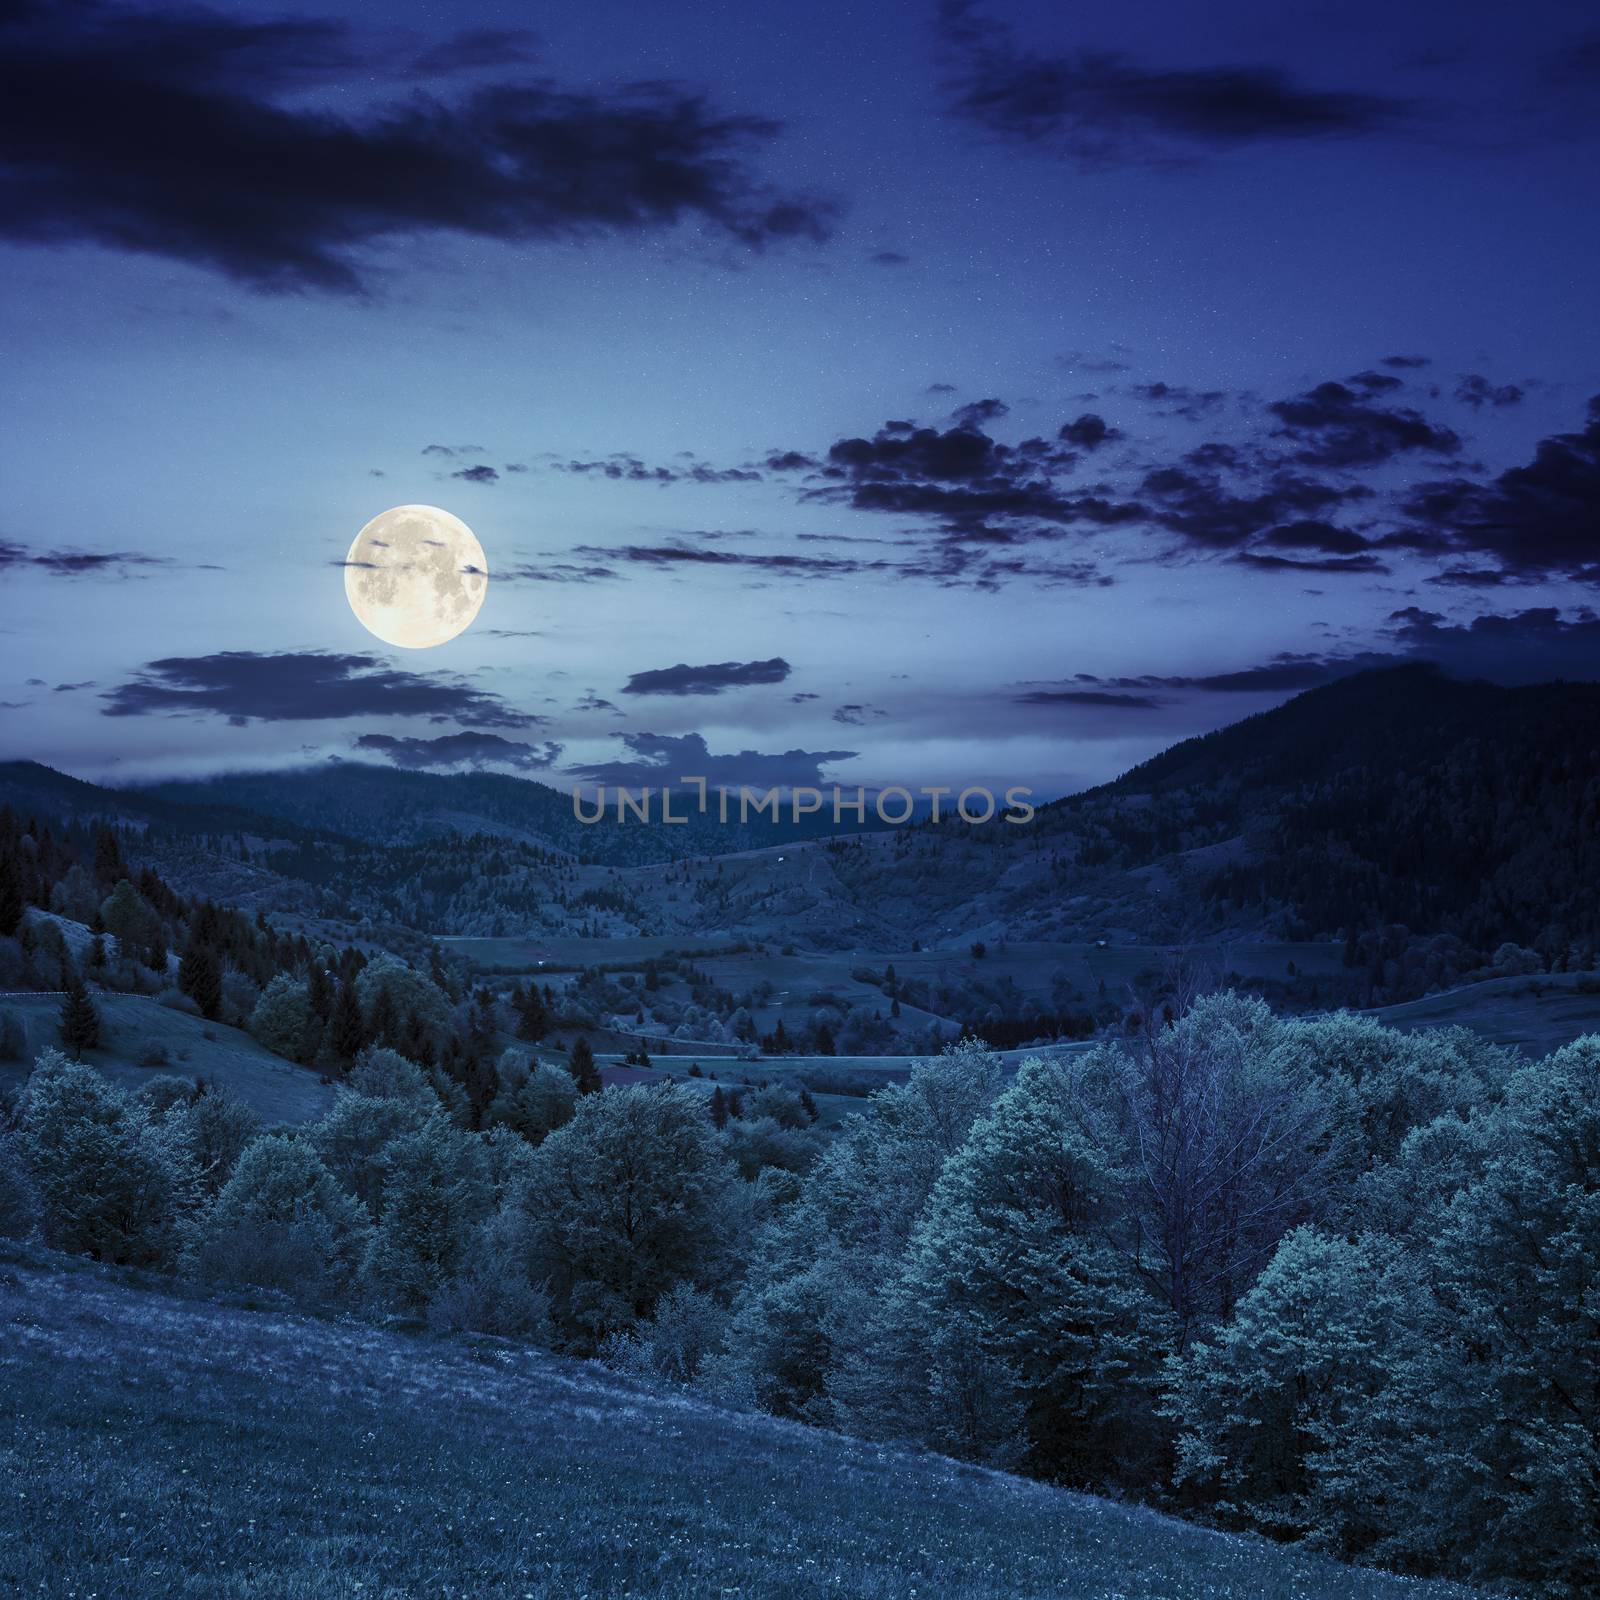 slope of mountain range with coniferous forest and village at night in full moon light